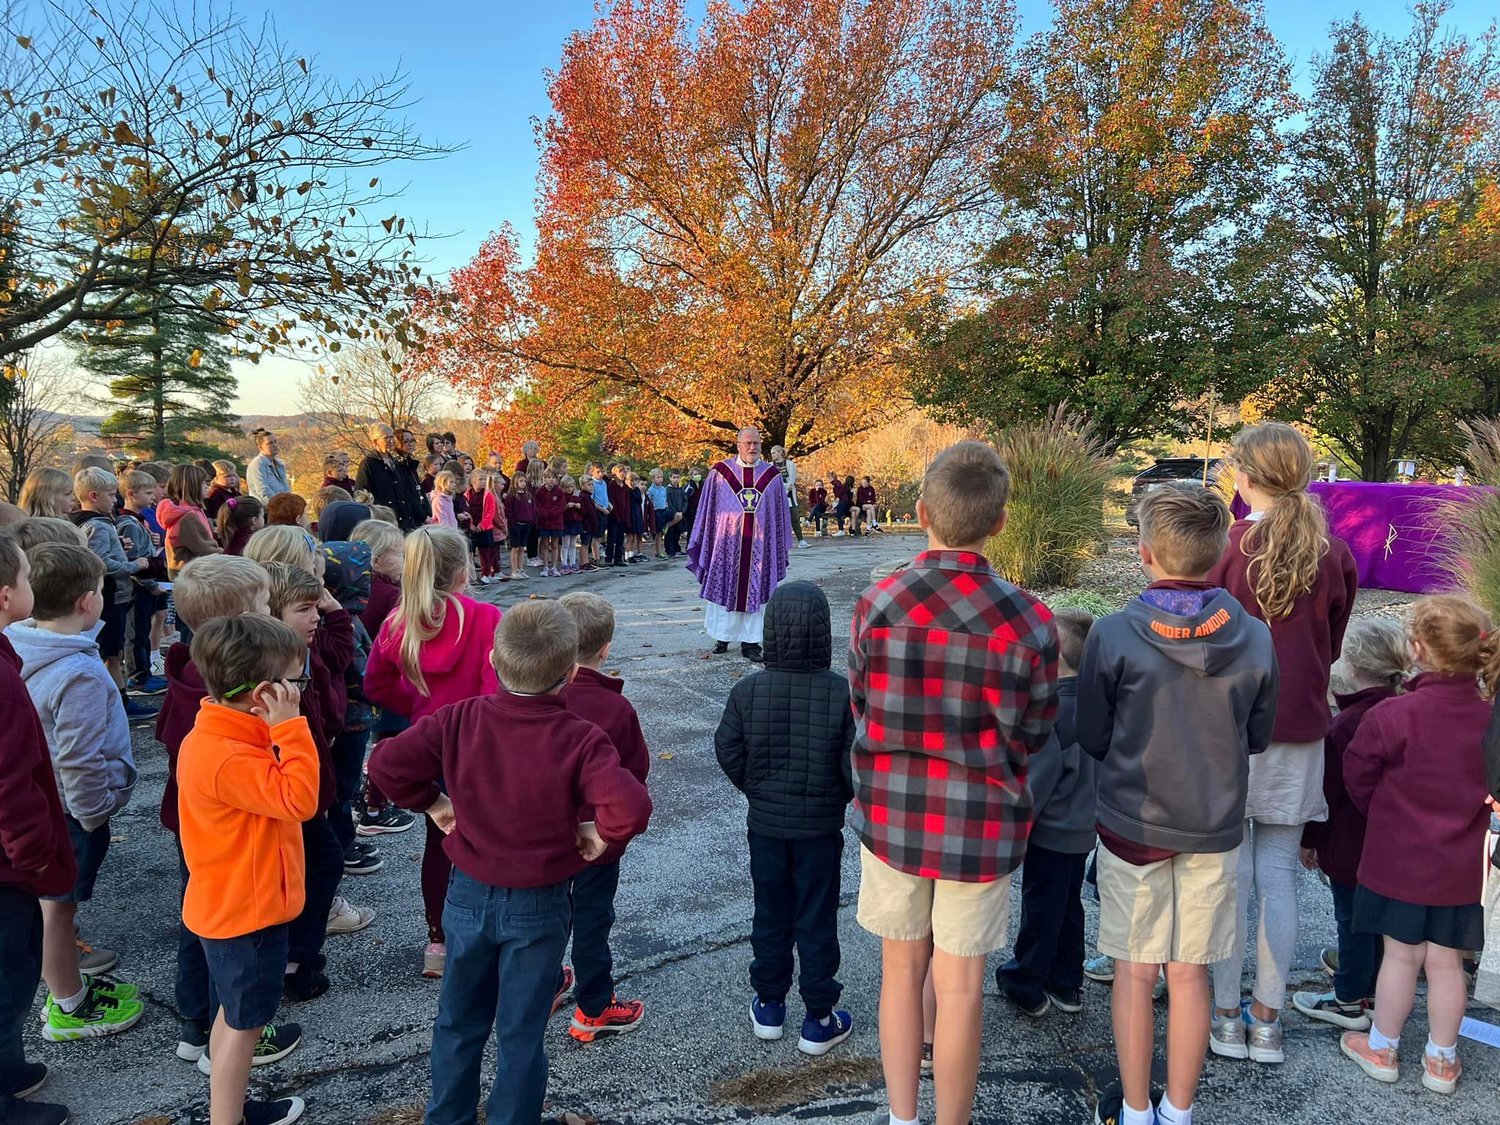 Students of St. George School in Hermann join Father Philip Niekamp, pastor of St. George Parish in Hermann and Church of the Risen Savior Parish in Rhineland, for Mass in St. George Cemetery in Hermann for All Souls Day.